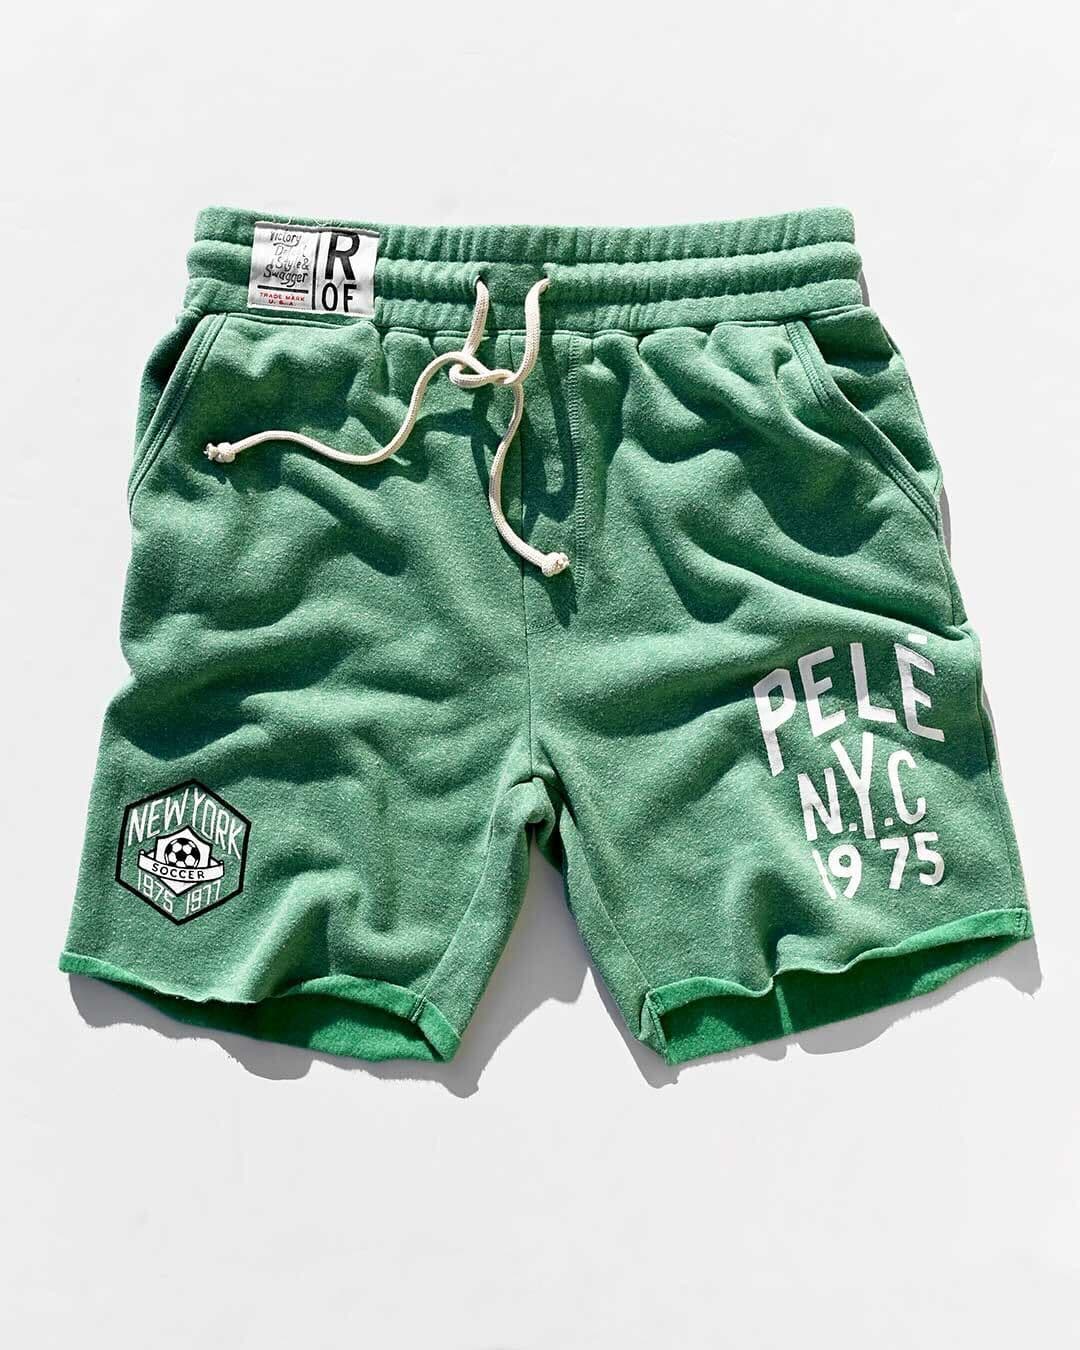 Pelé NYC 1975 Green Shorts - Roots of Fight Canada